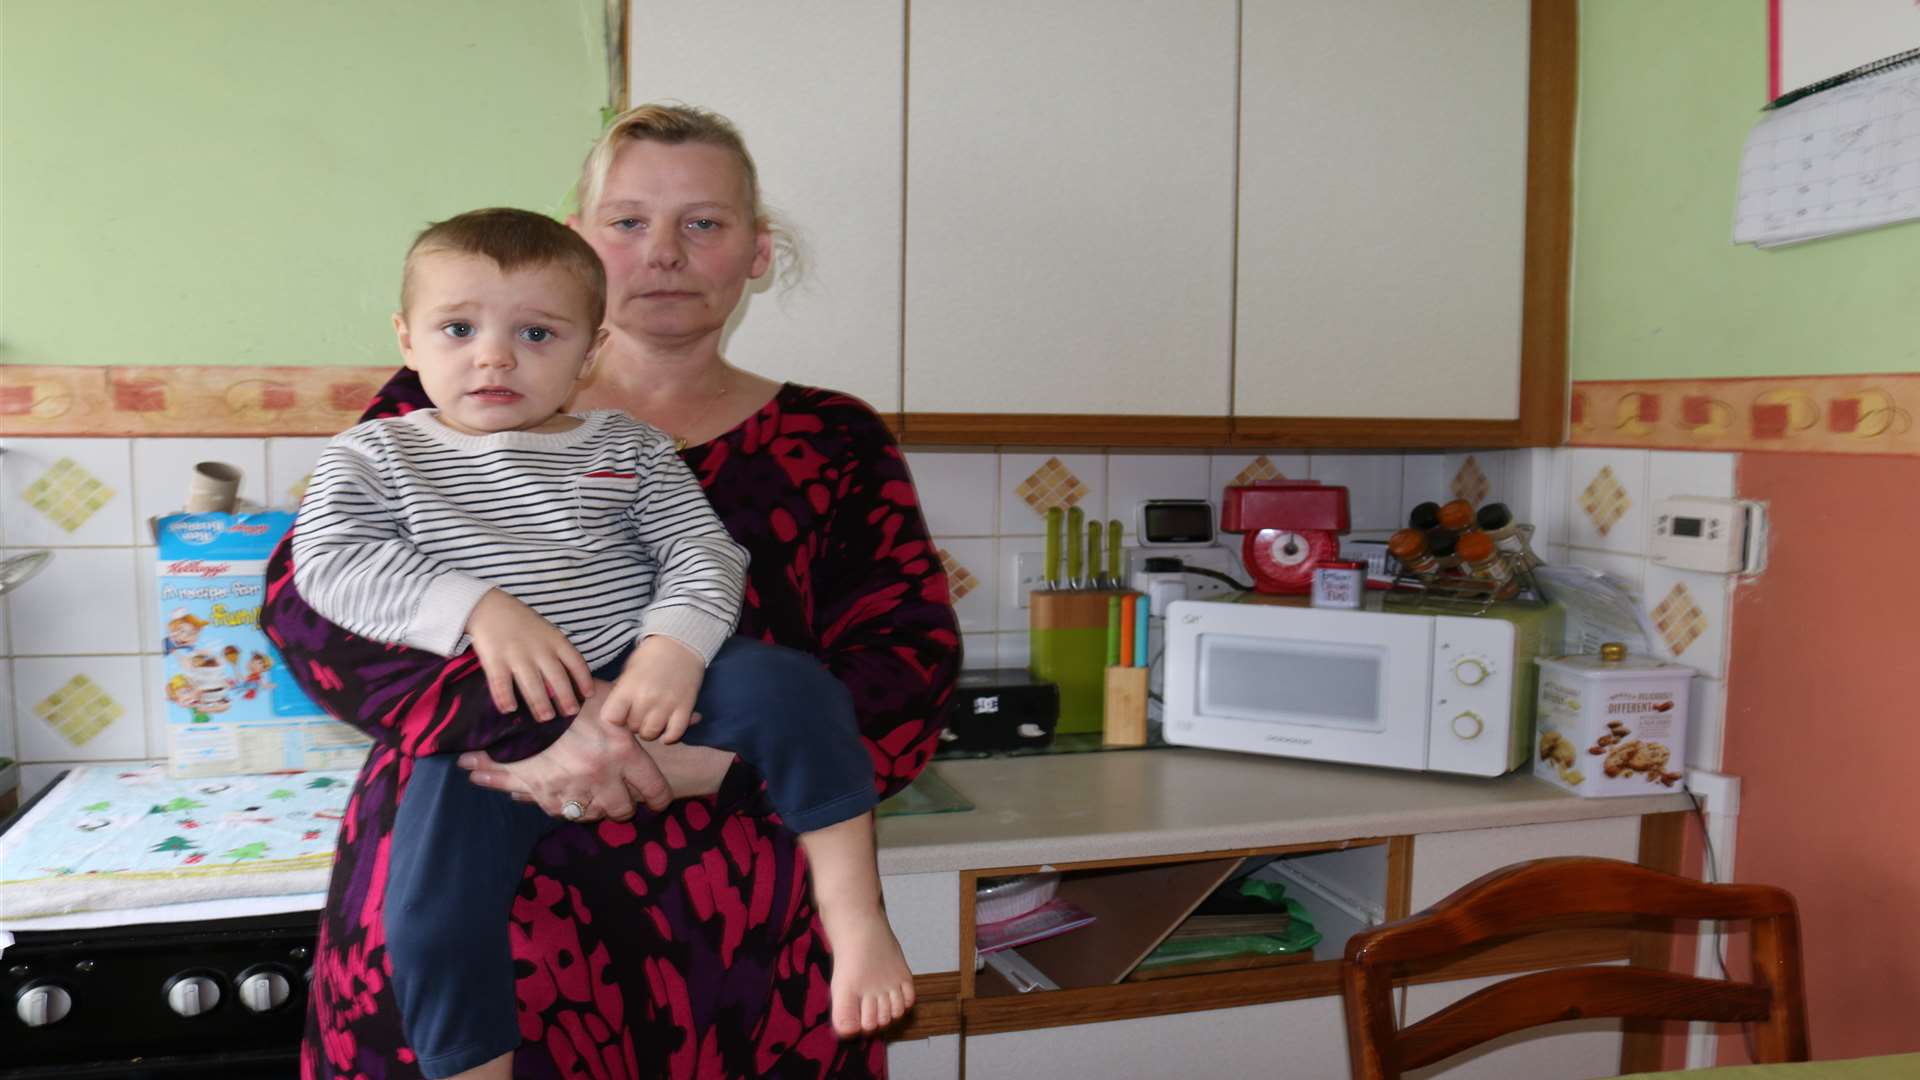 Sinead De Lobel and her son Callum, aged two, who suffers from asthma and is affected by the damp and mould in their home in Dickens Road, Gravesend